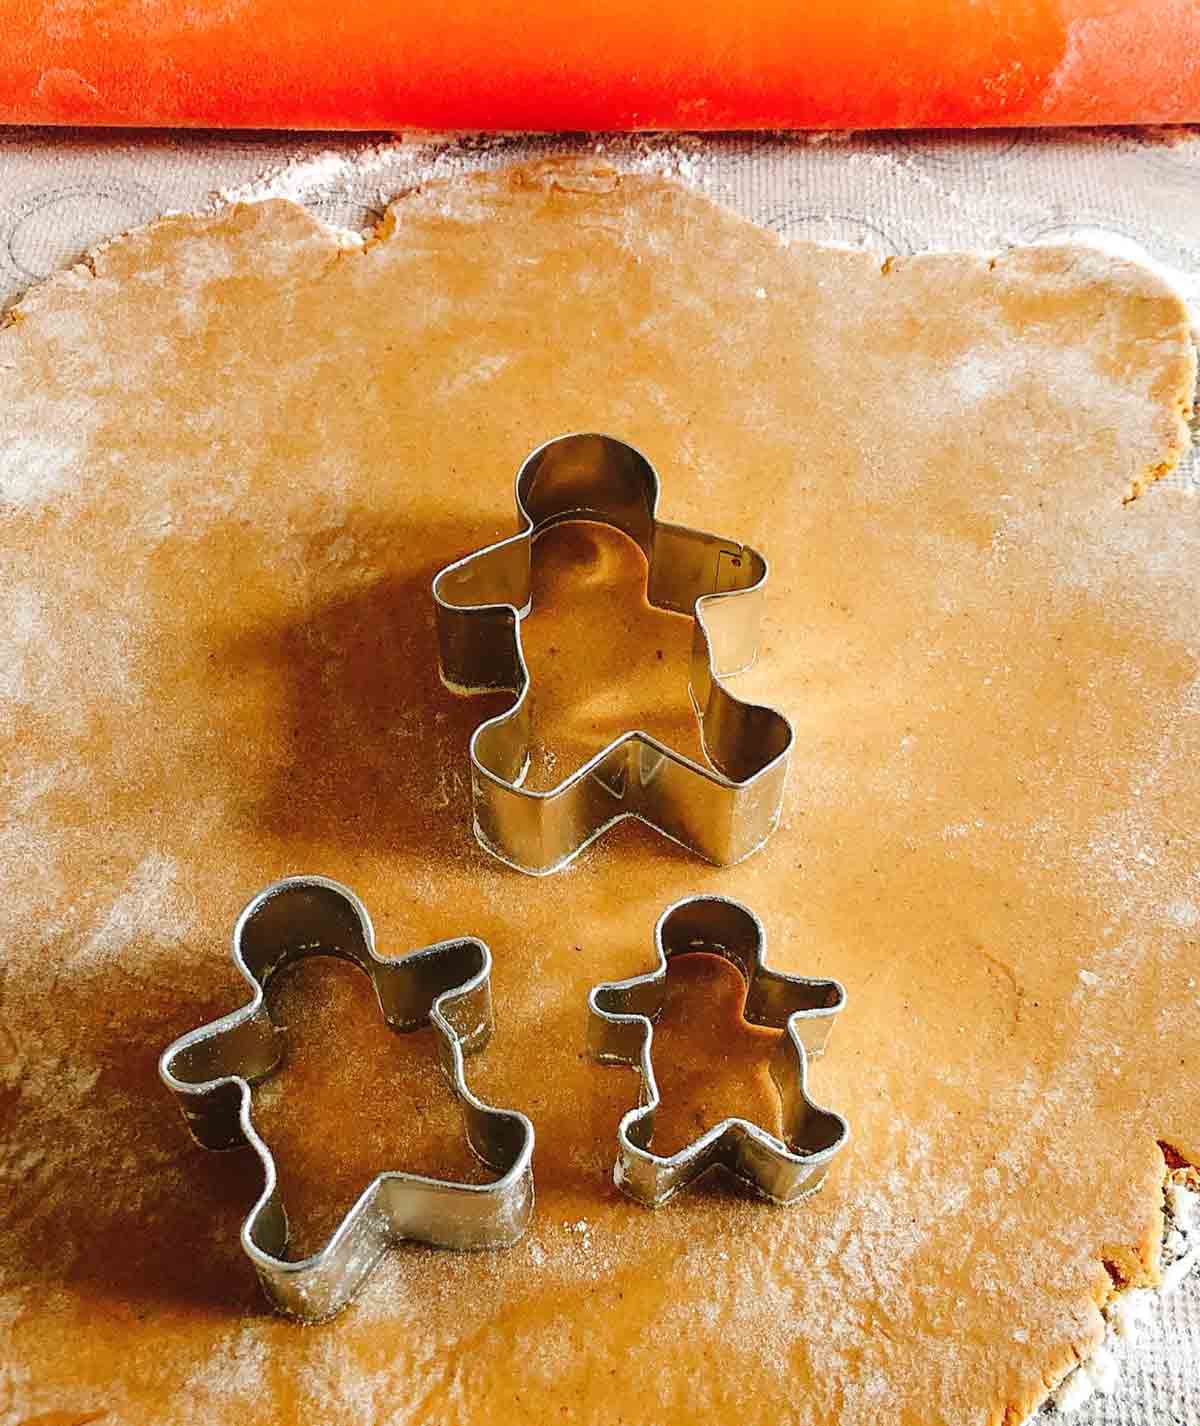 Gingerbread cookie dough rolled out on with three gingerbread men cookie cutters on top.